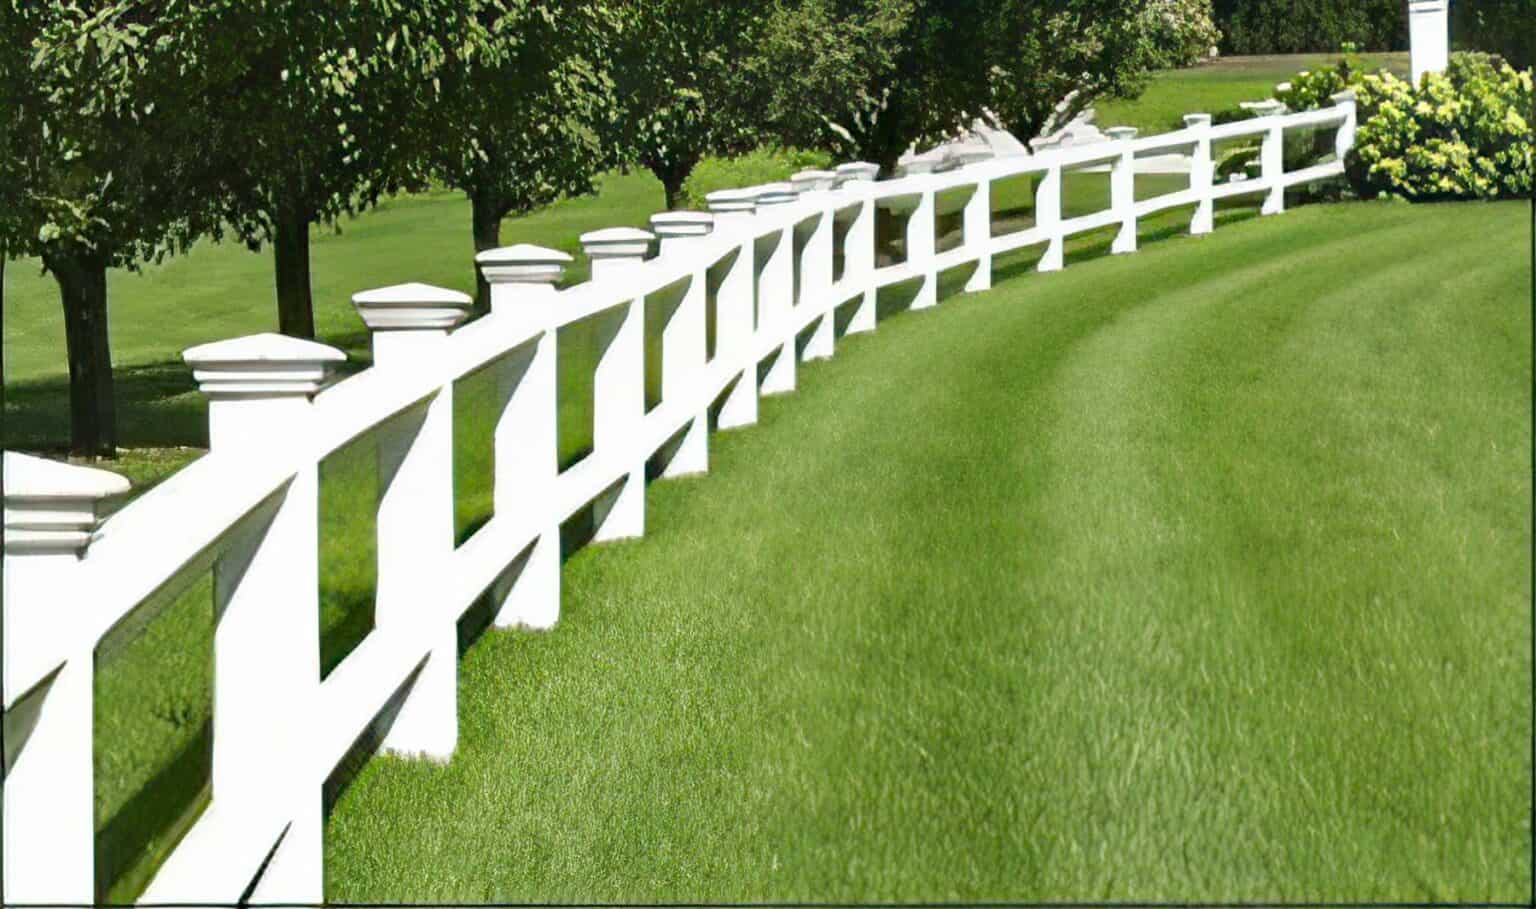 Vinyl 2-rail ranch fence in serene country setting with farmhouse, open field, grassy lawn, and trees in the background.